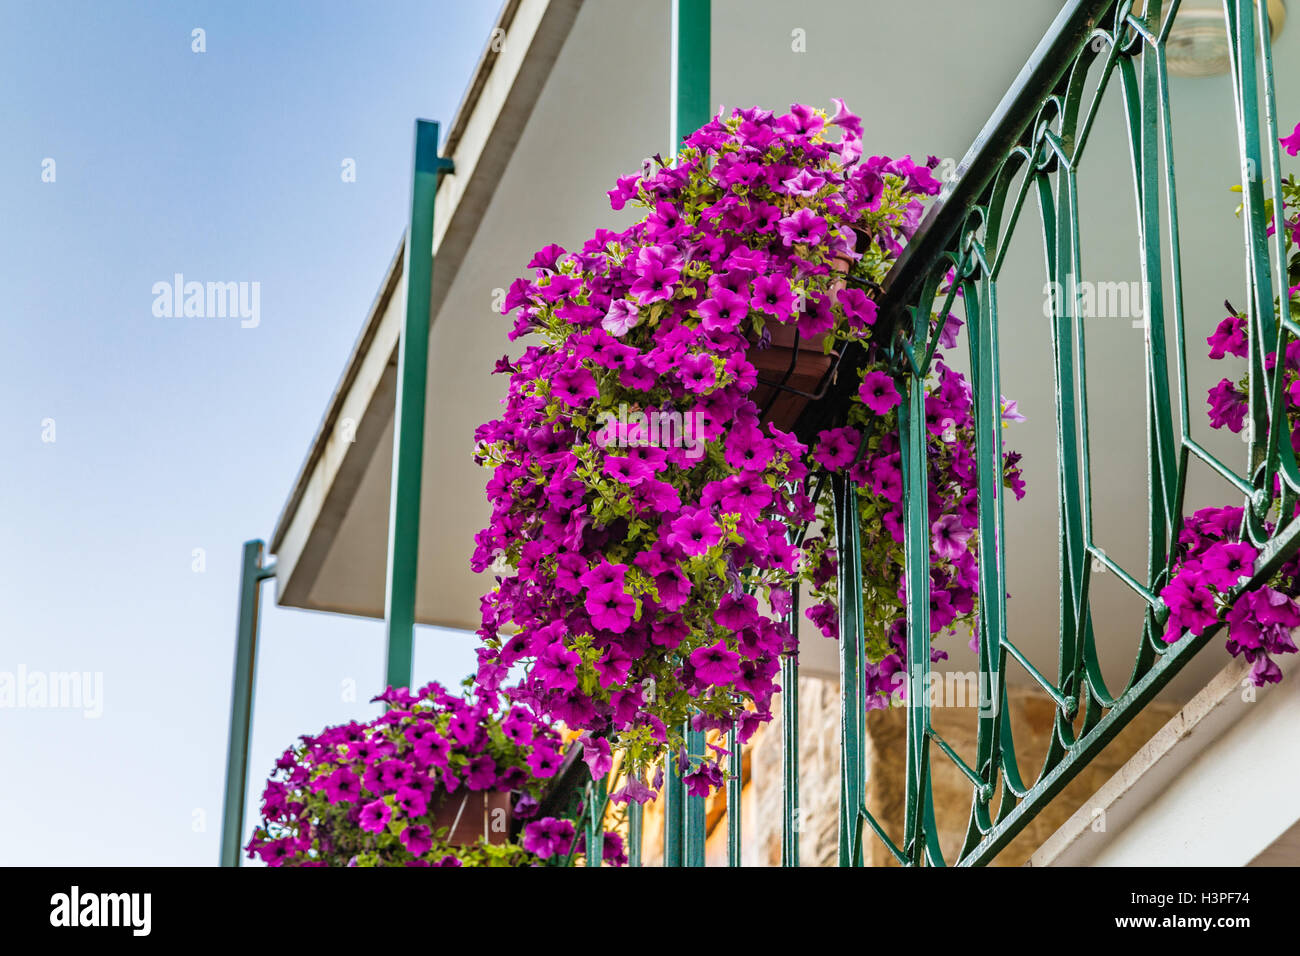 pot of petunias hanging from a balcony with a metal railing Stock Photo